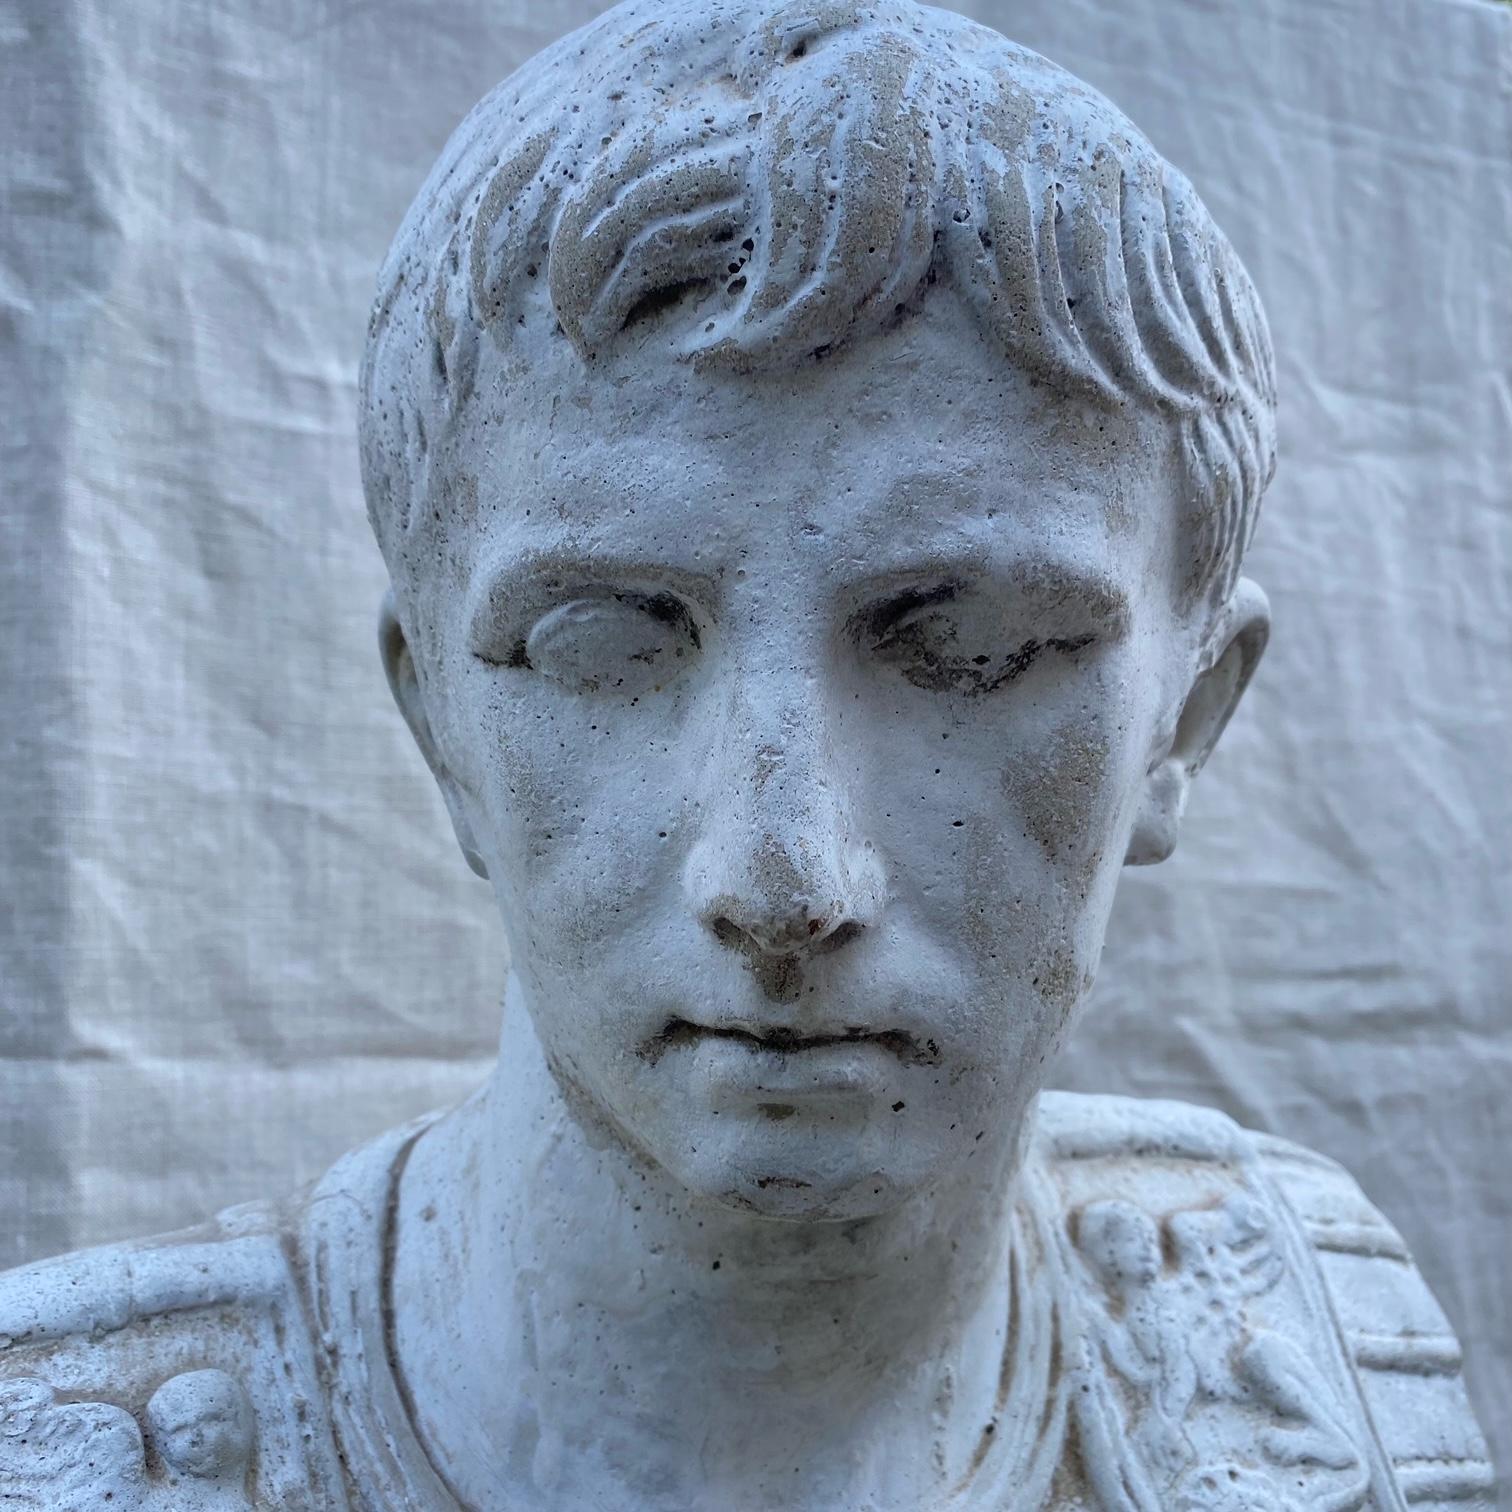 Emperor Augustus Caesar, Roman statesman and military leader, first Emperor of the Roman Empire, captured in an impressive hand sculpted bust from France, circa 1890. The sculpture represents the face of a young soldier/military man Julius Caesar, a